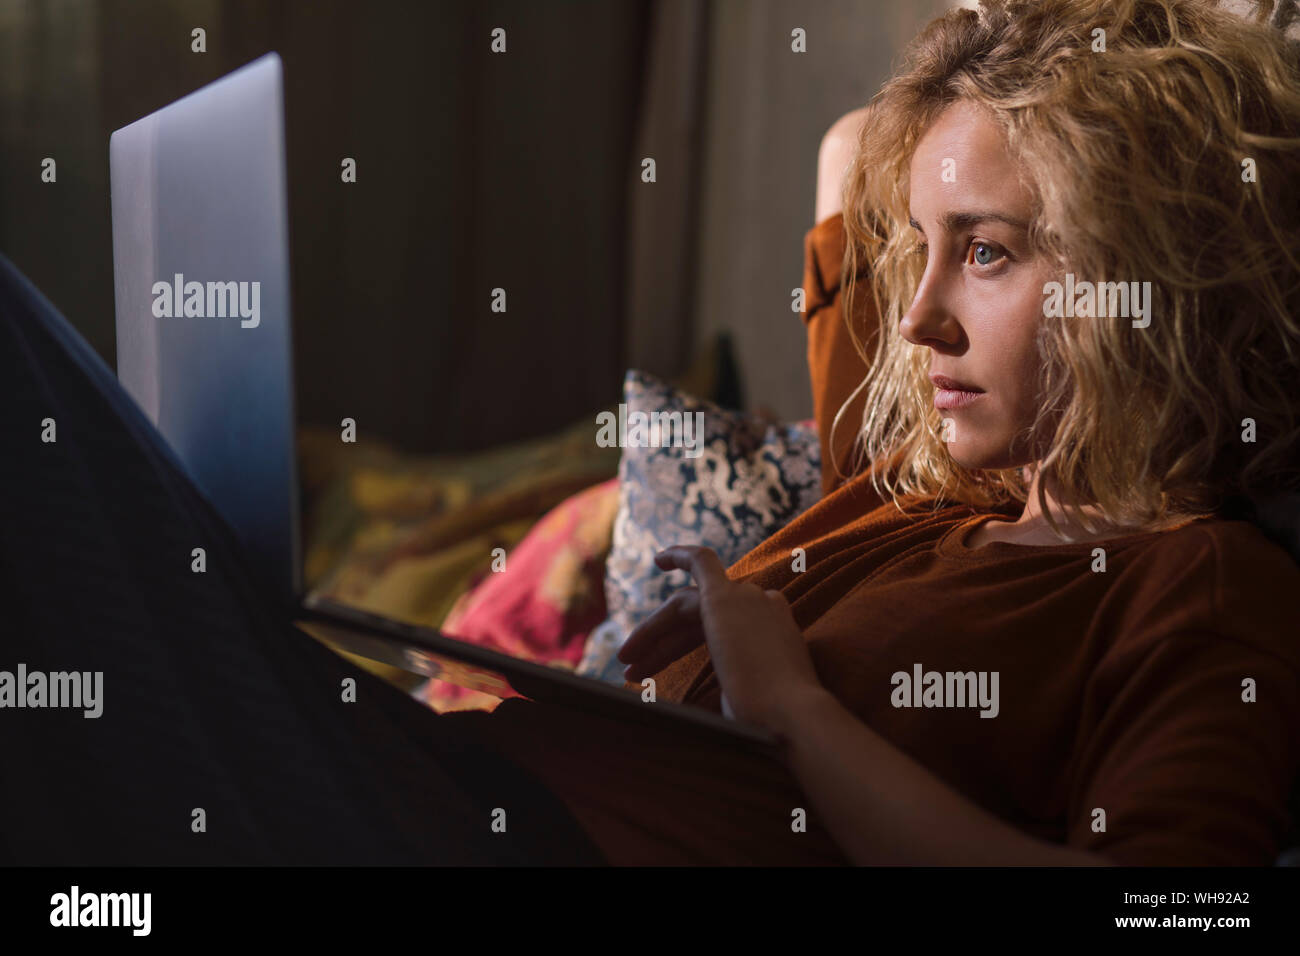 Portrait of blond young woman lying on bed using laptop Stock Photo